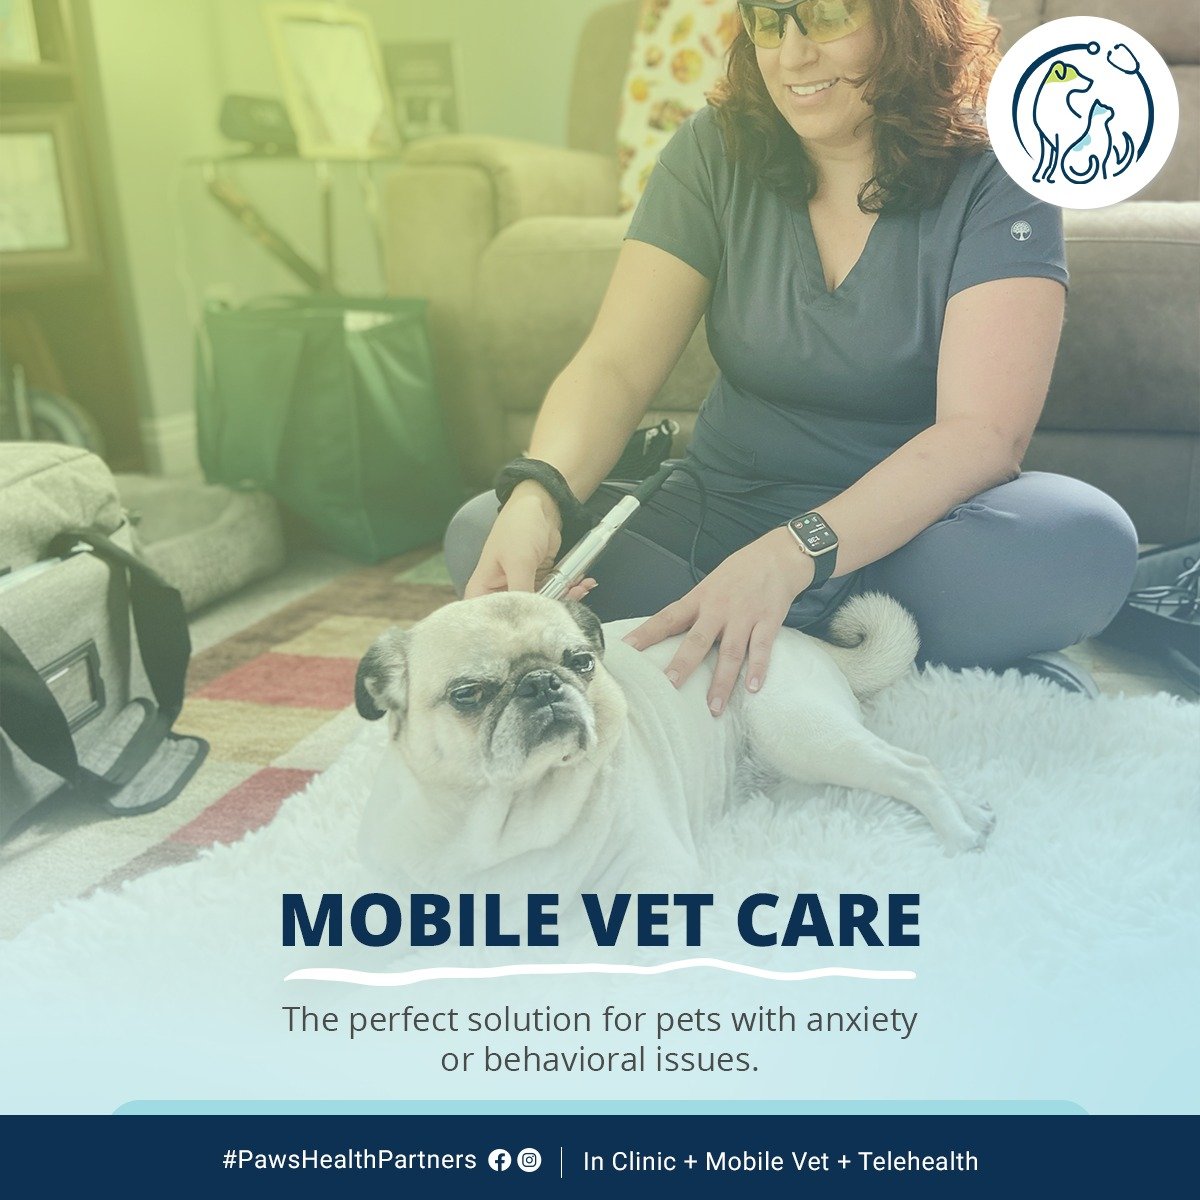 Our Mobile Veterinarian comes to you!